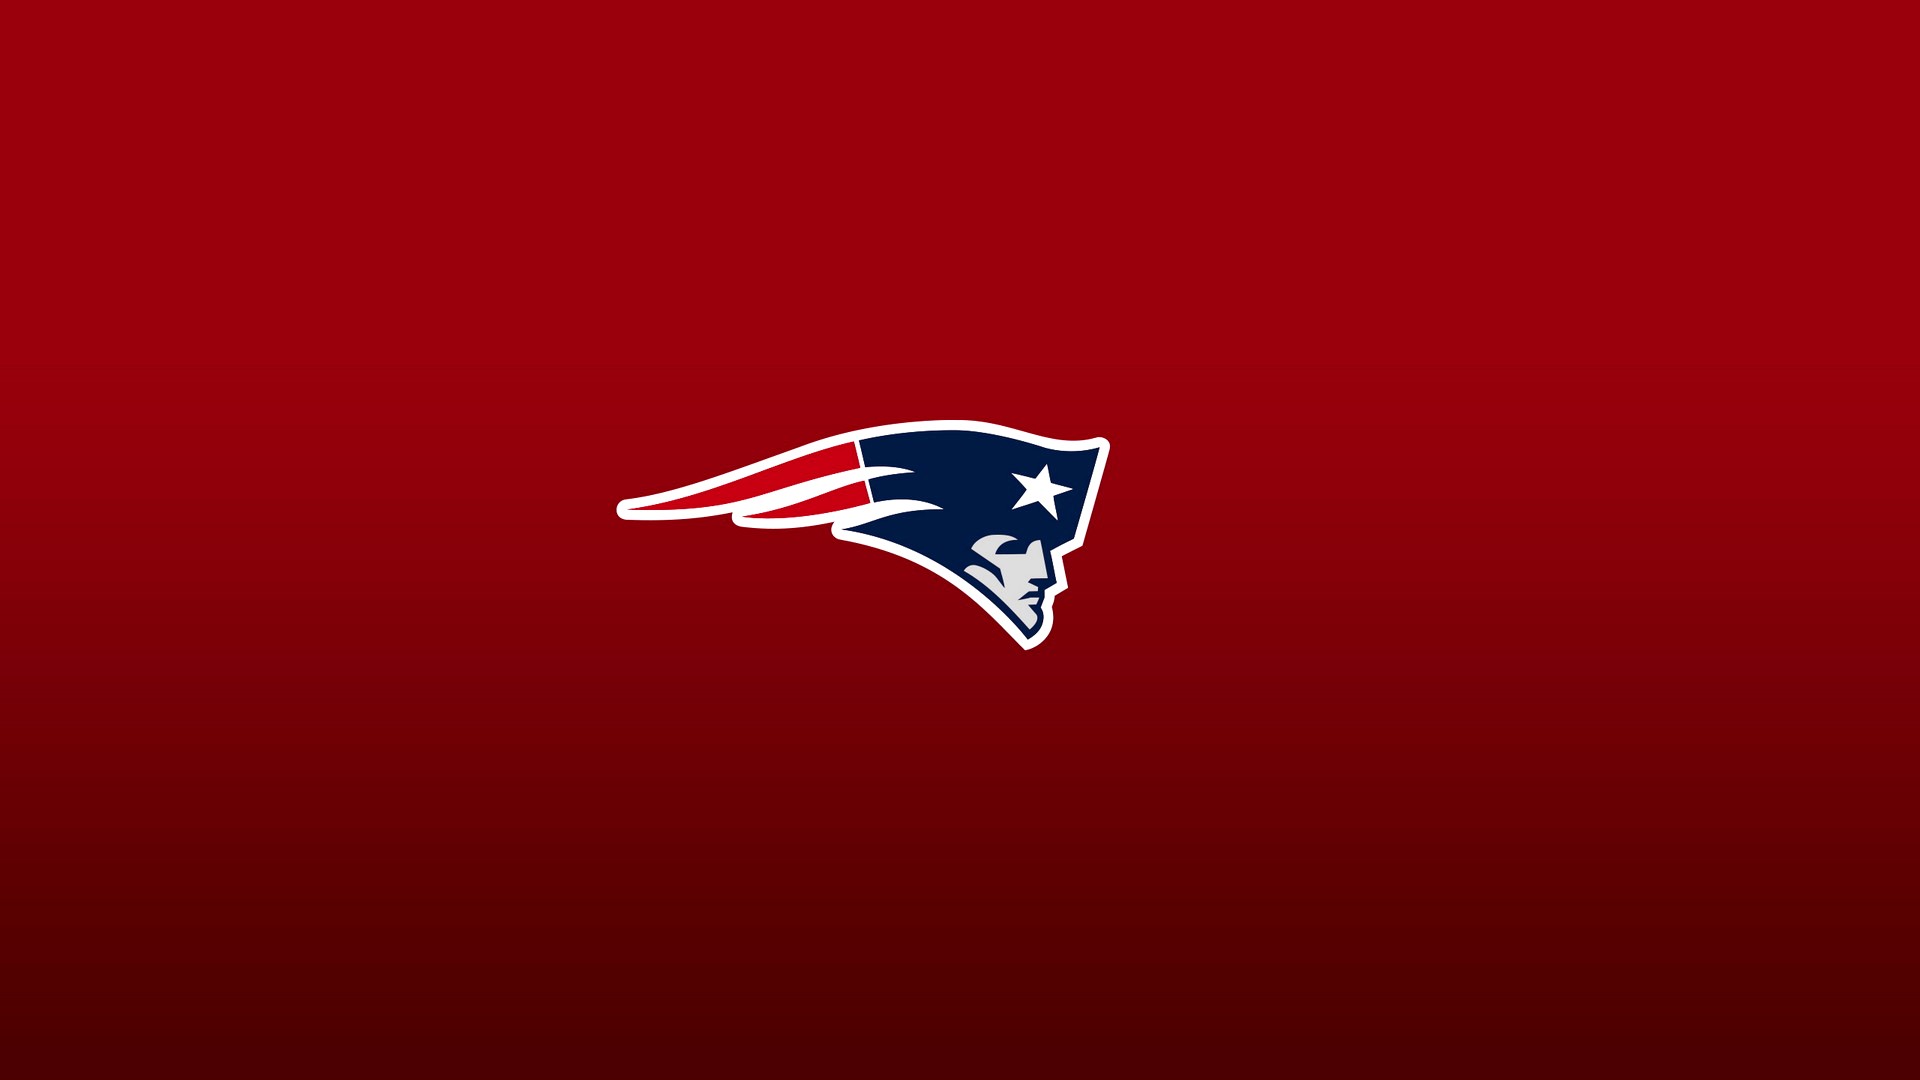 NE Patriots Mac Wallpaper with high-resolution 1920x1080 pixel. You can use and set as wallpaper for Notebook Screensavers, Mac Wallpapers, Mobile Home Screen, iPhone or Android Phones Lock Screen